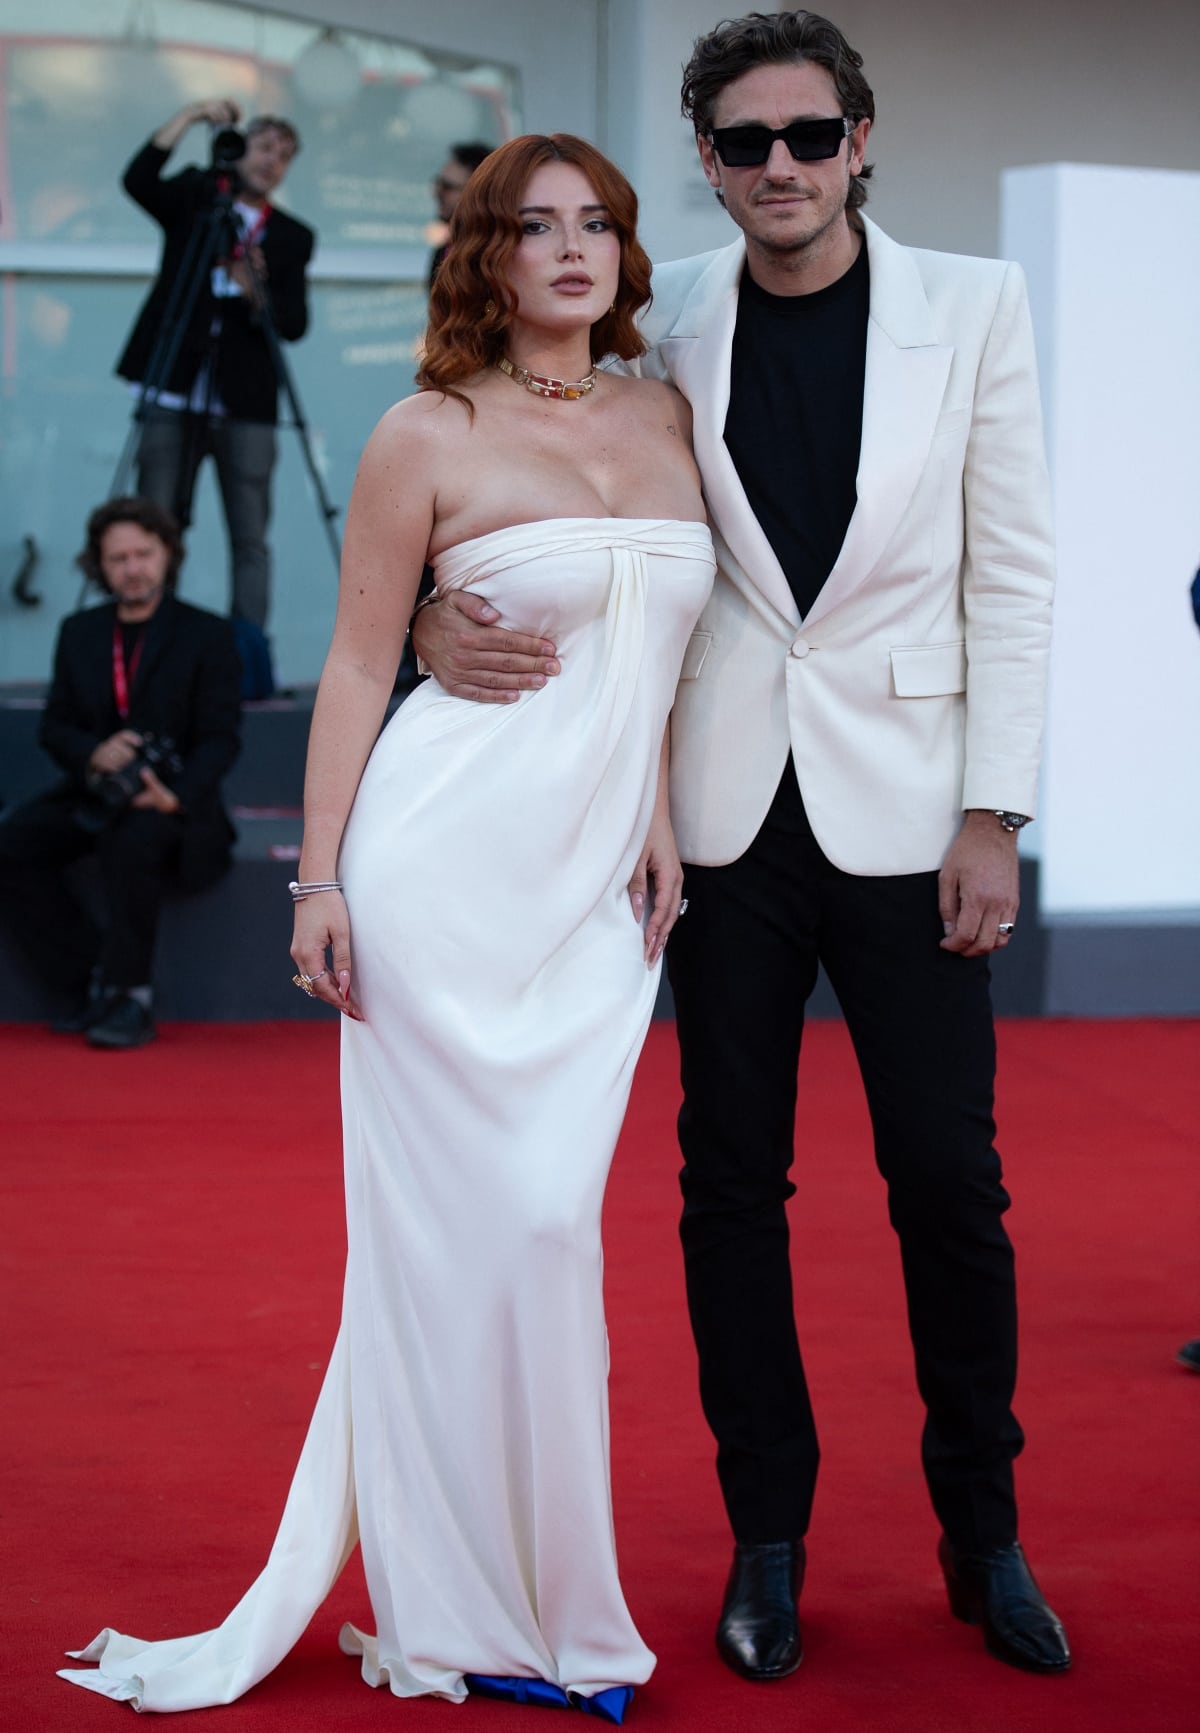 Forming a stylish power couple, Bella Thorne and Mark Emms proudly displayed their affection for each other at the premiere of Priscilla during the 80th Venice International Film Festival